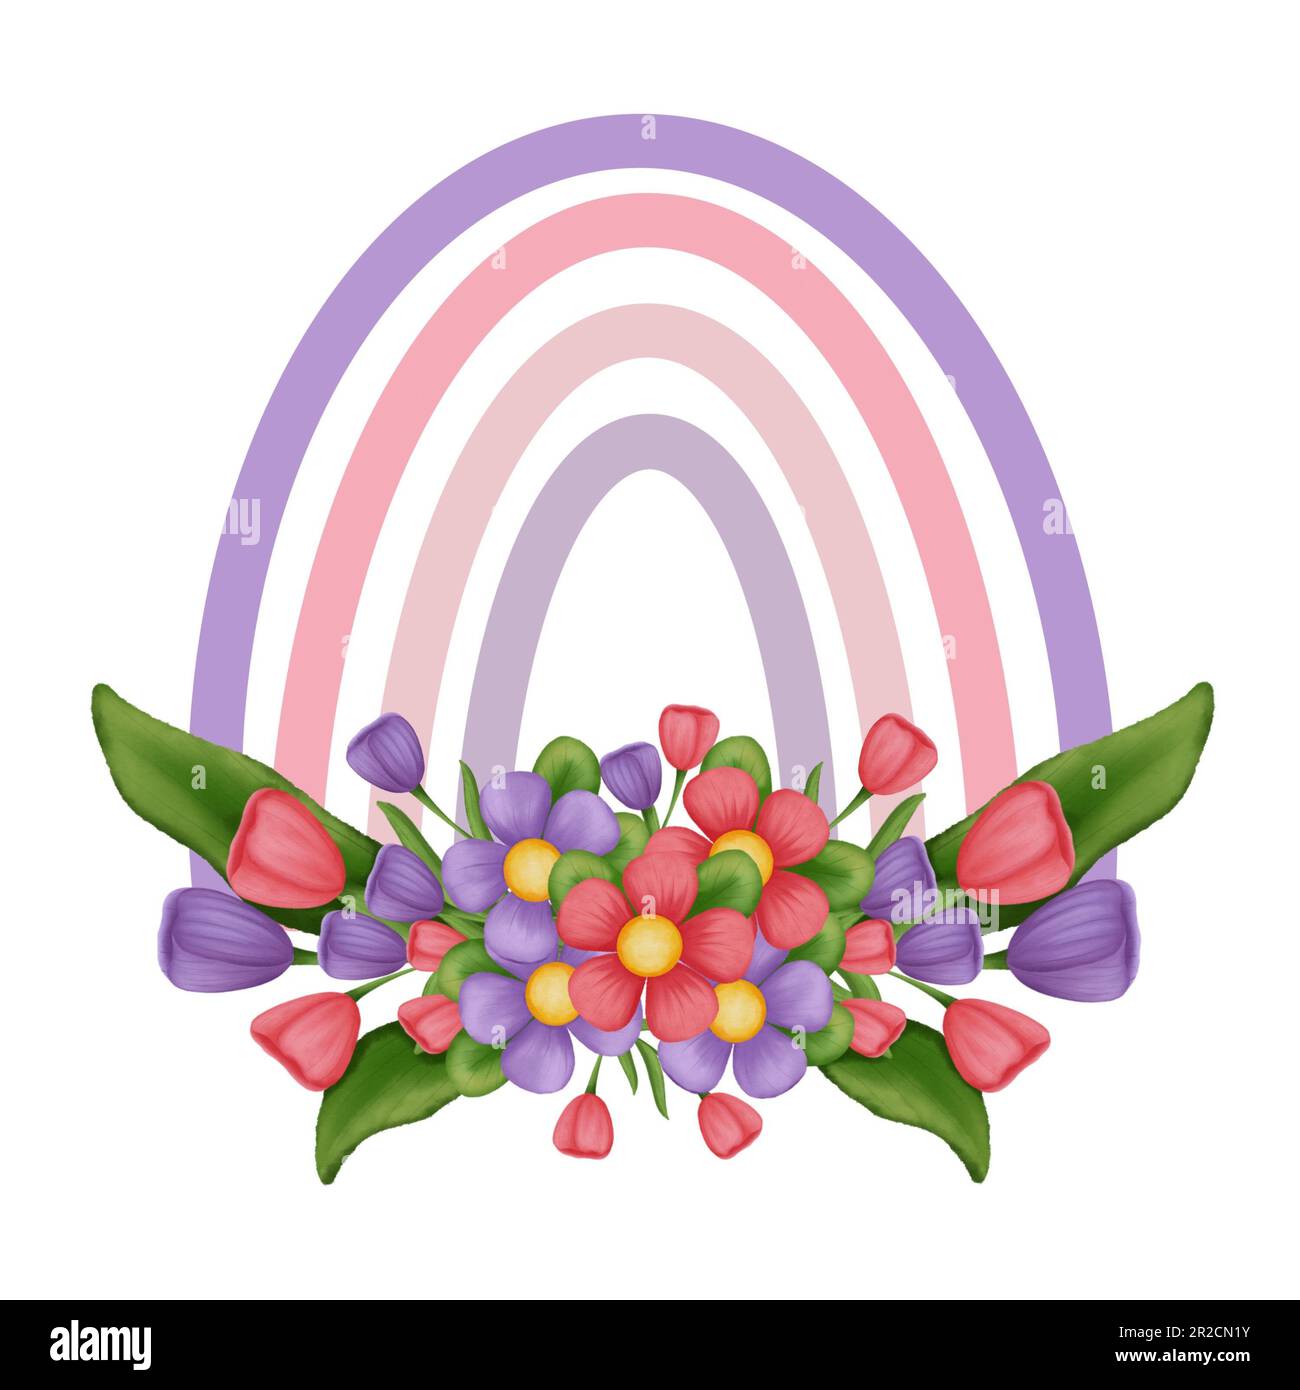 Rainbow with spring flower bouquet illustration isolated on white background.Wedding decoration,greeting,invitation,birthday party. Stock Photo